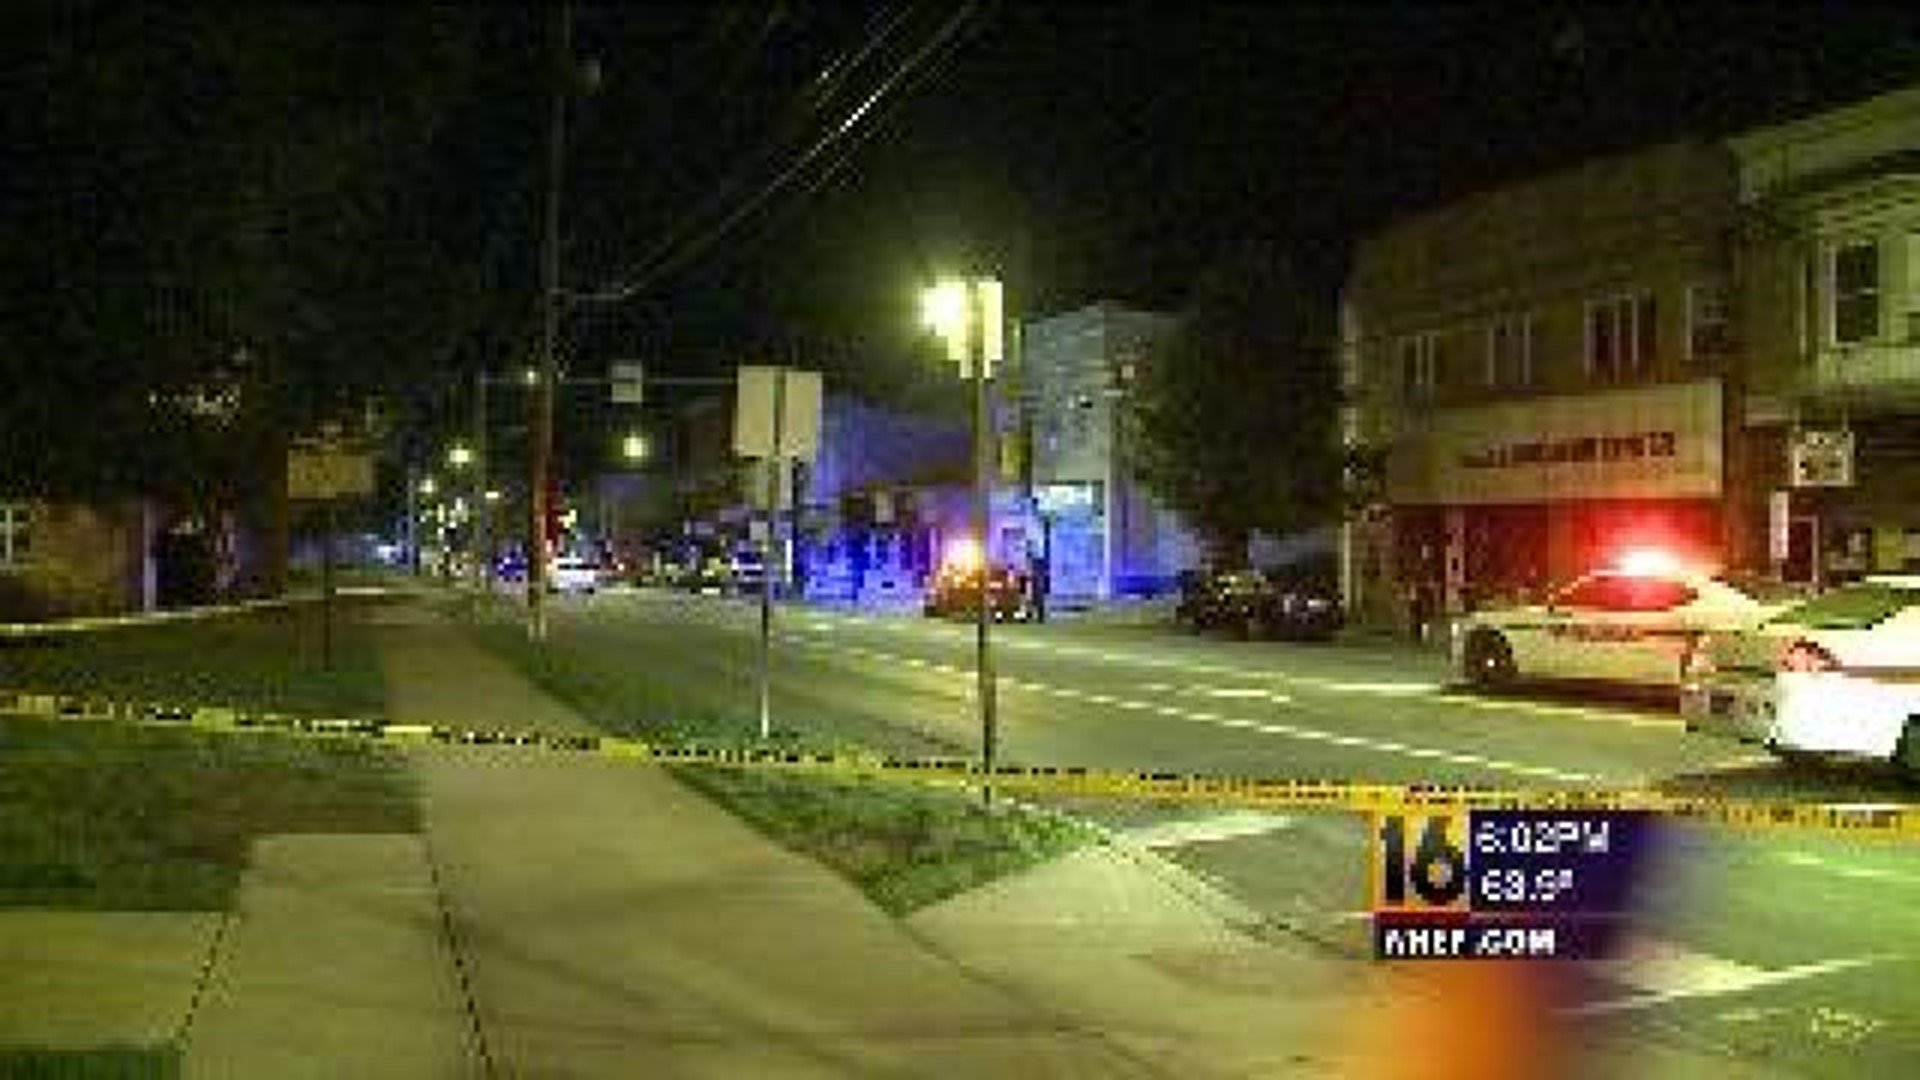 One Dead in Luzerne County Shooting